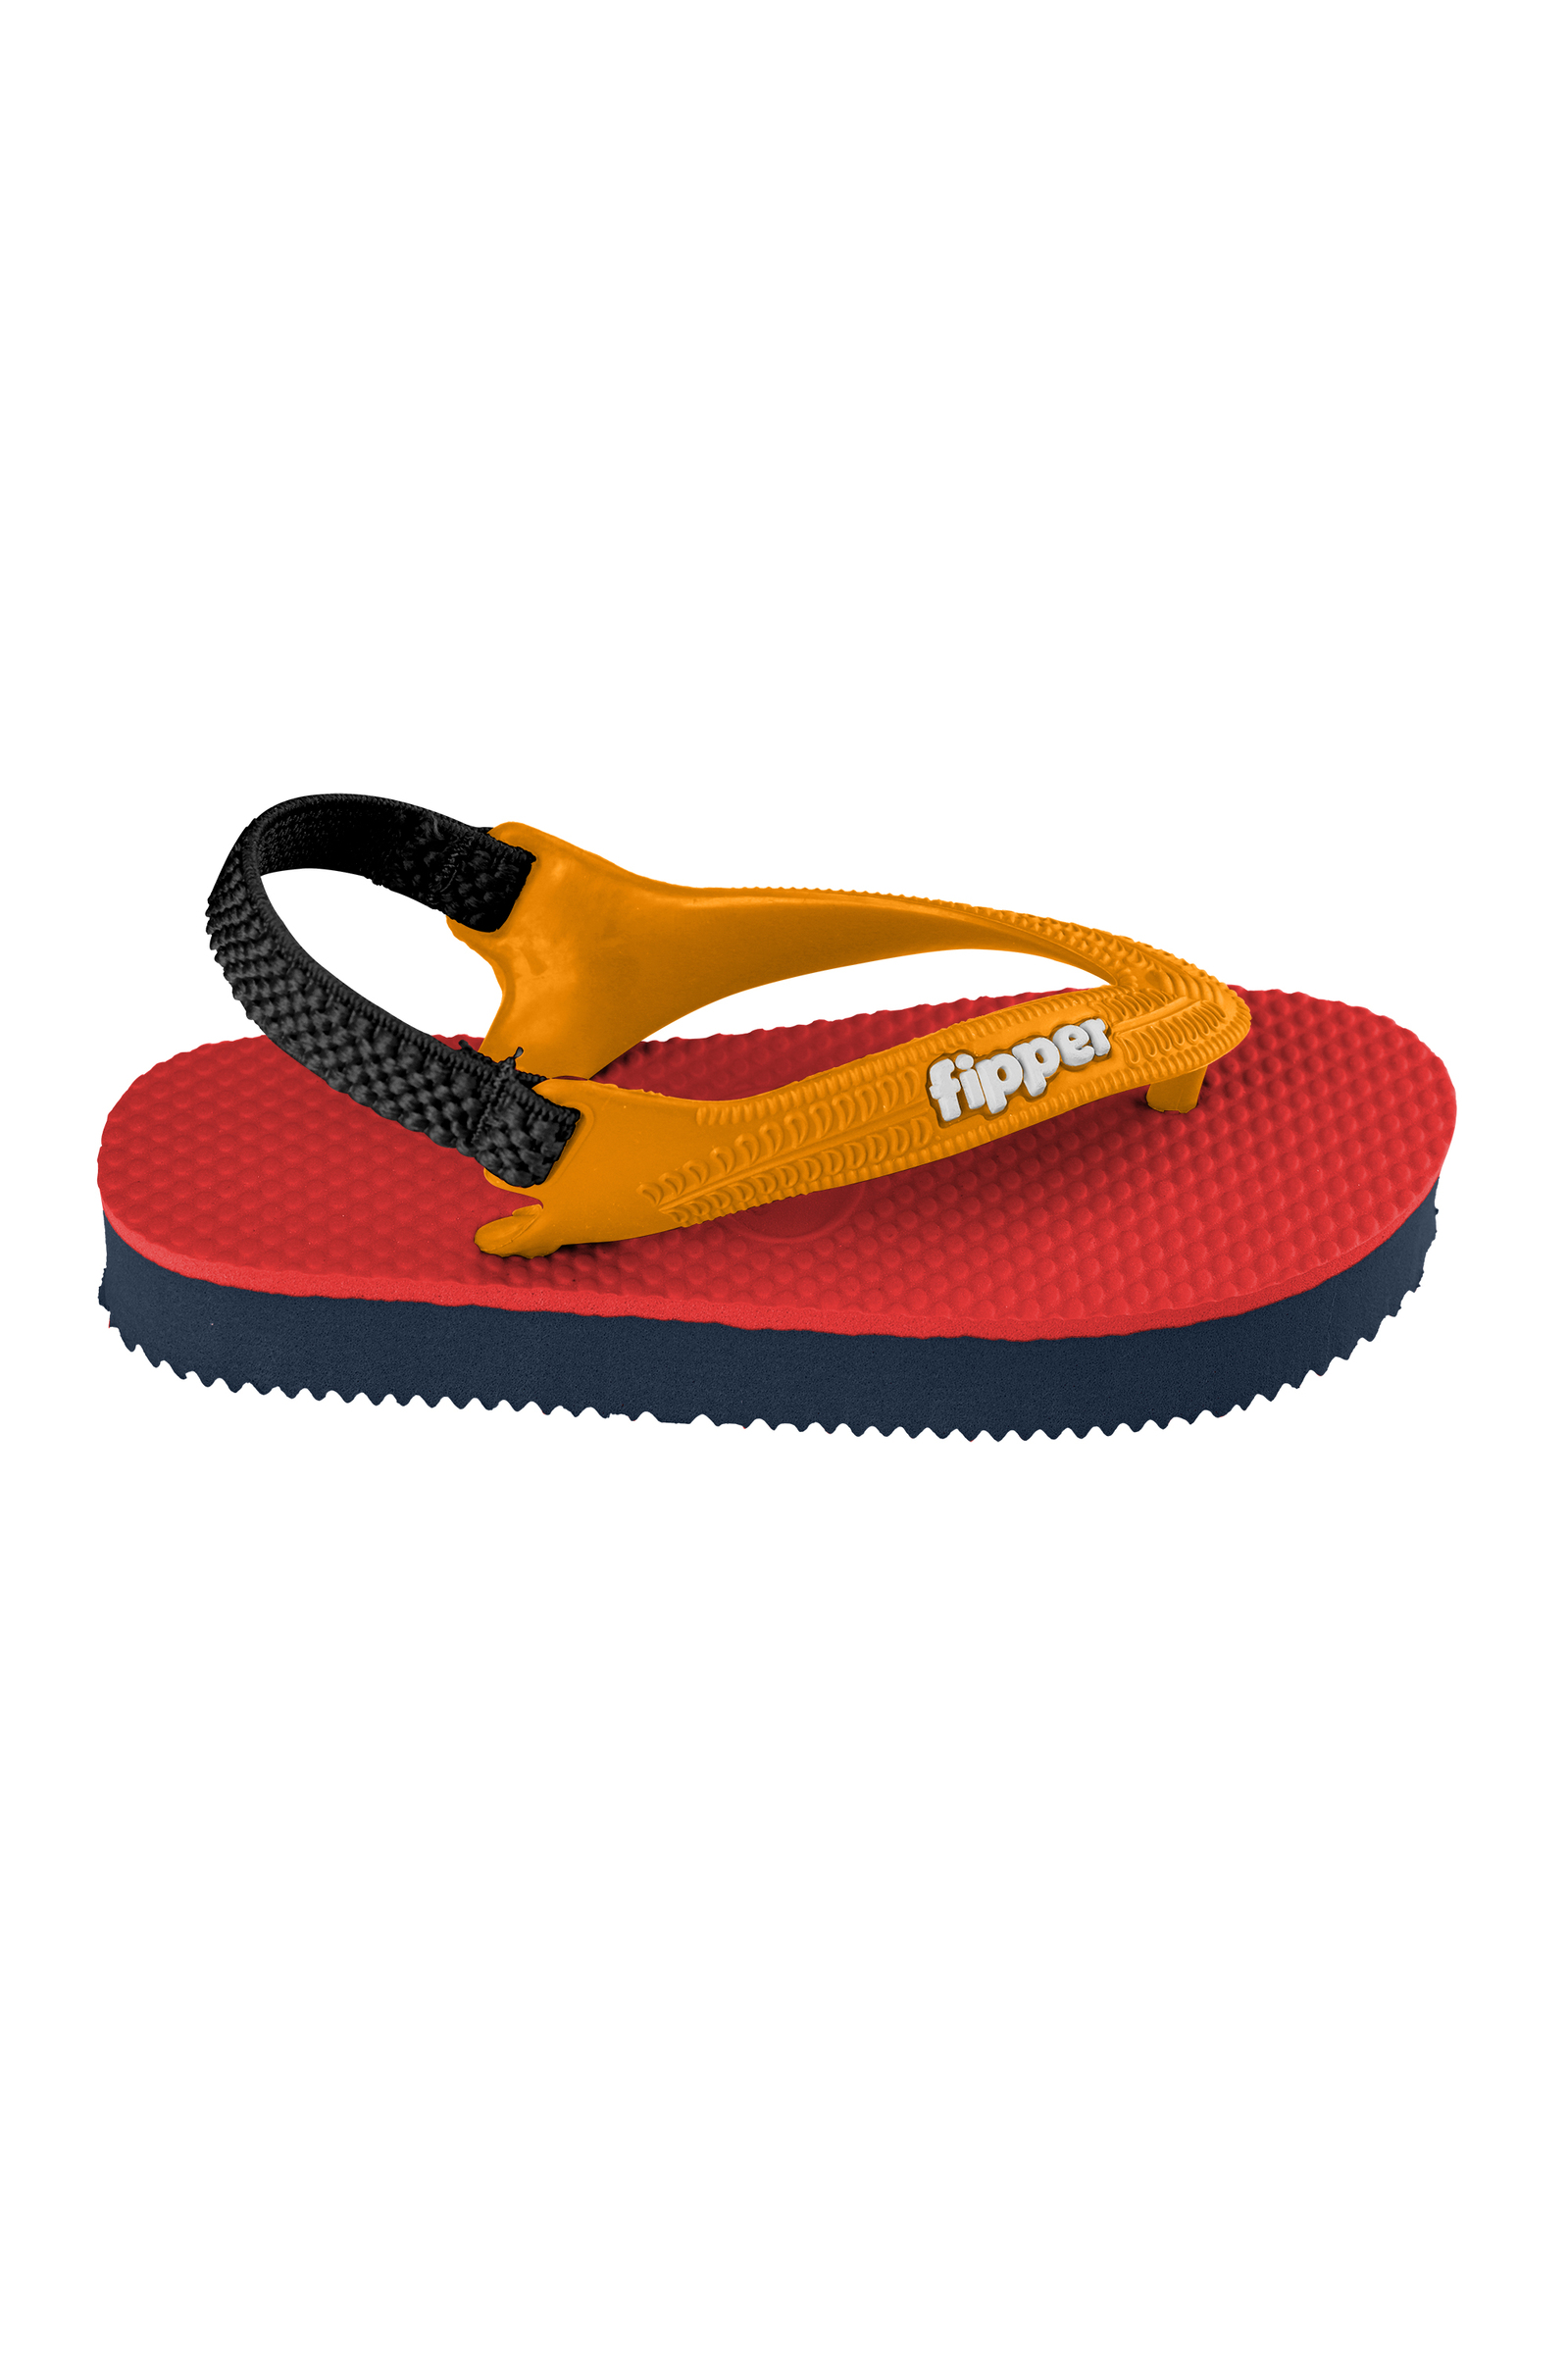 Fipper Todd's Rubber for Toddler in Red / Blue (Snorkel) / Orange